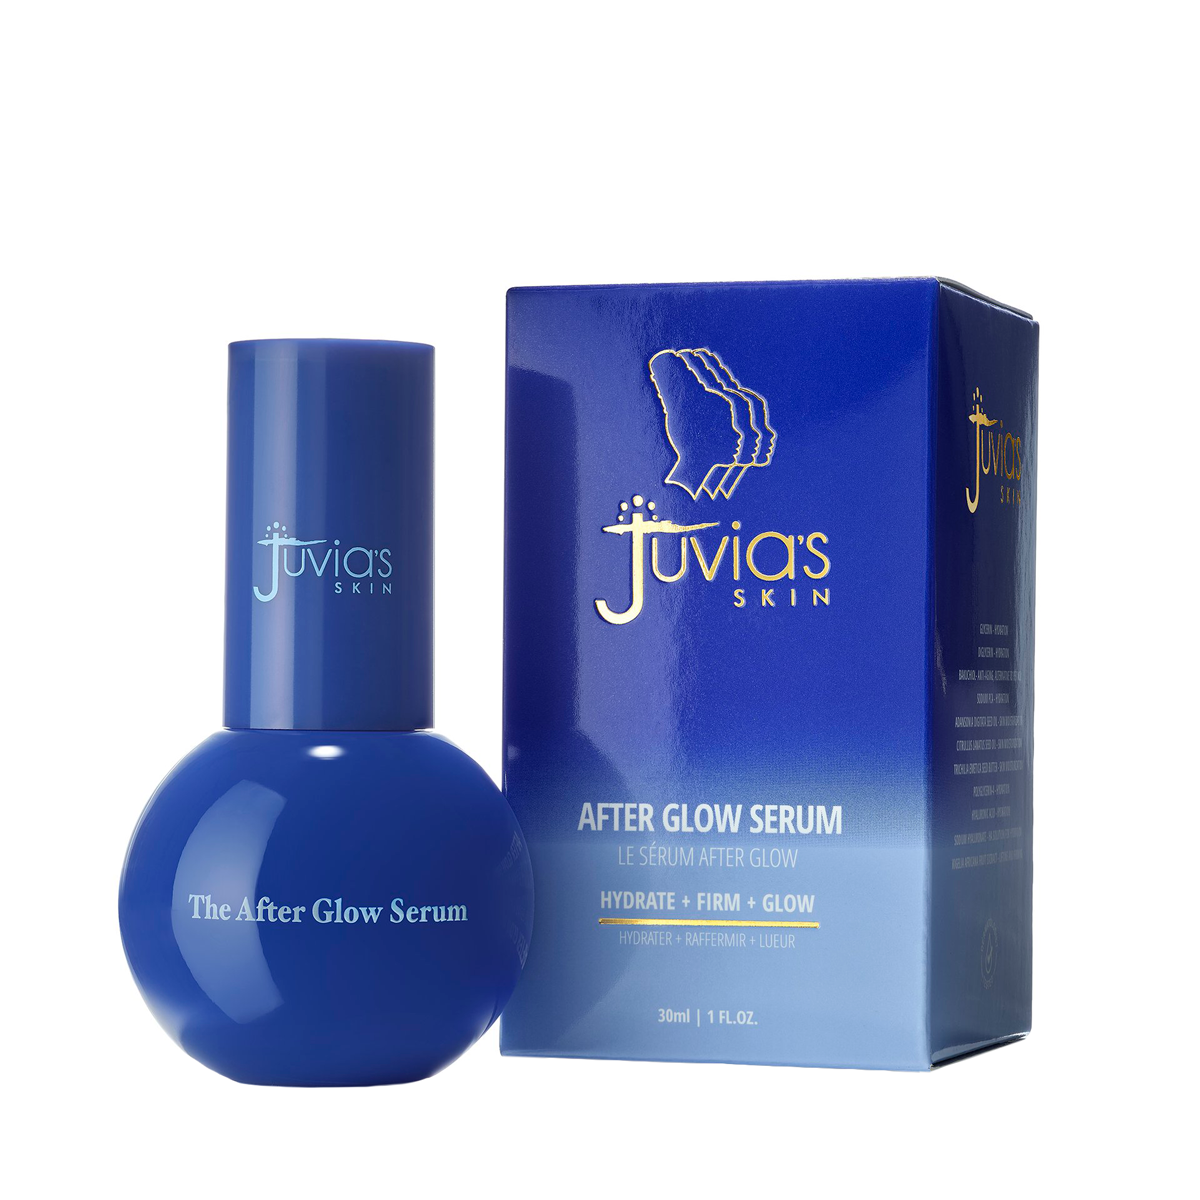 The Afterglow Serum